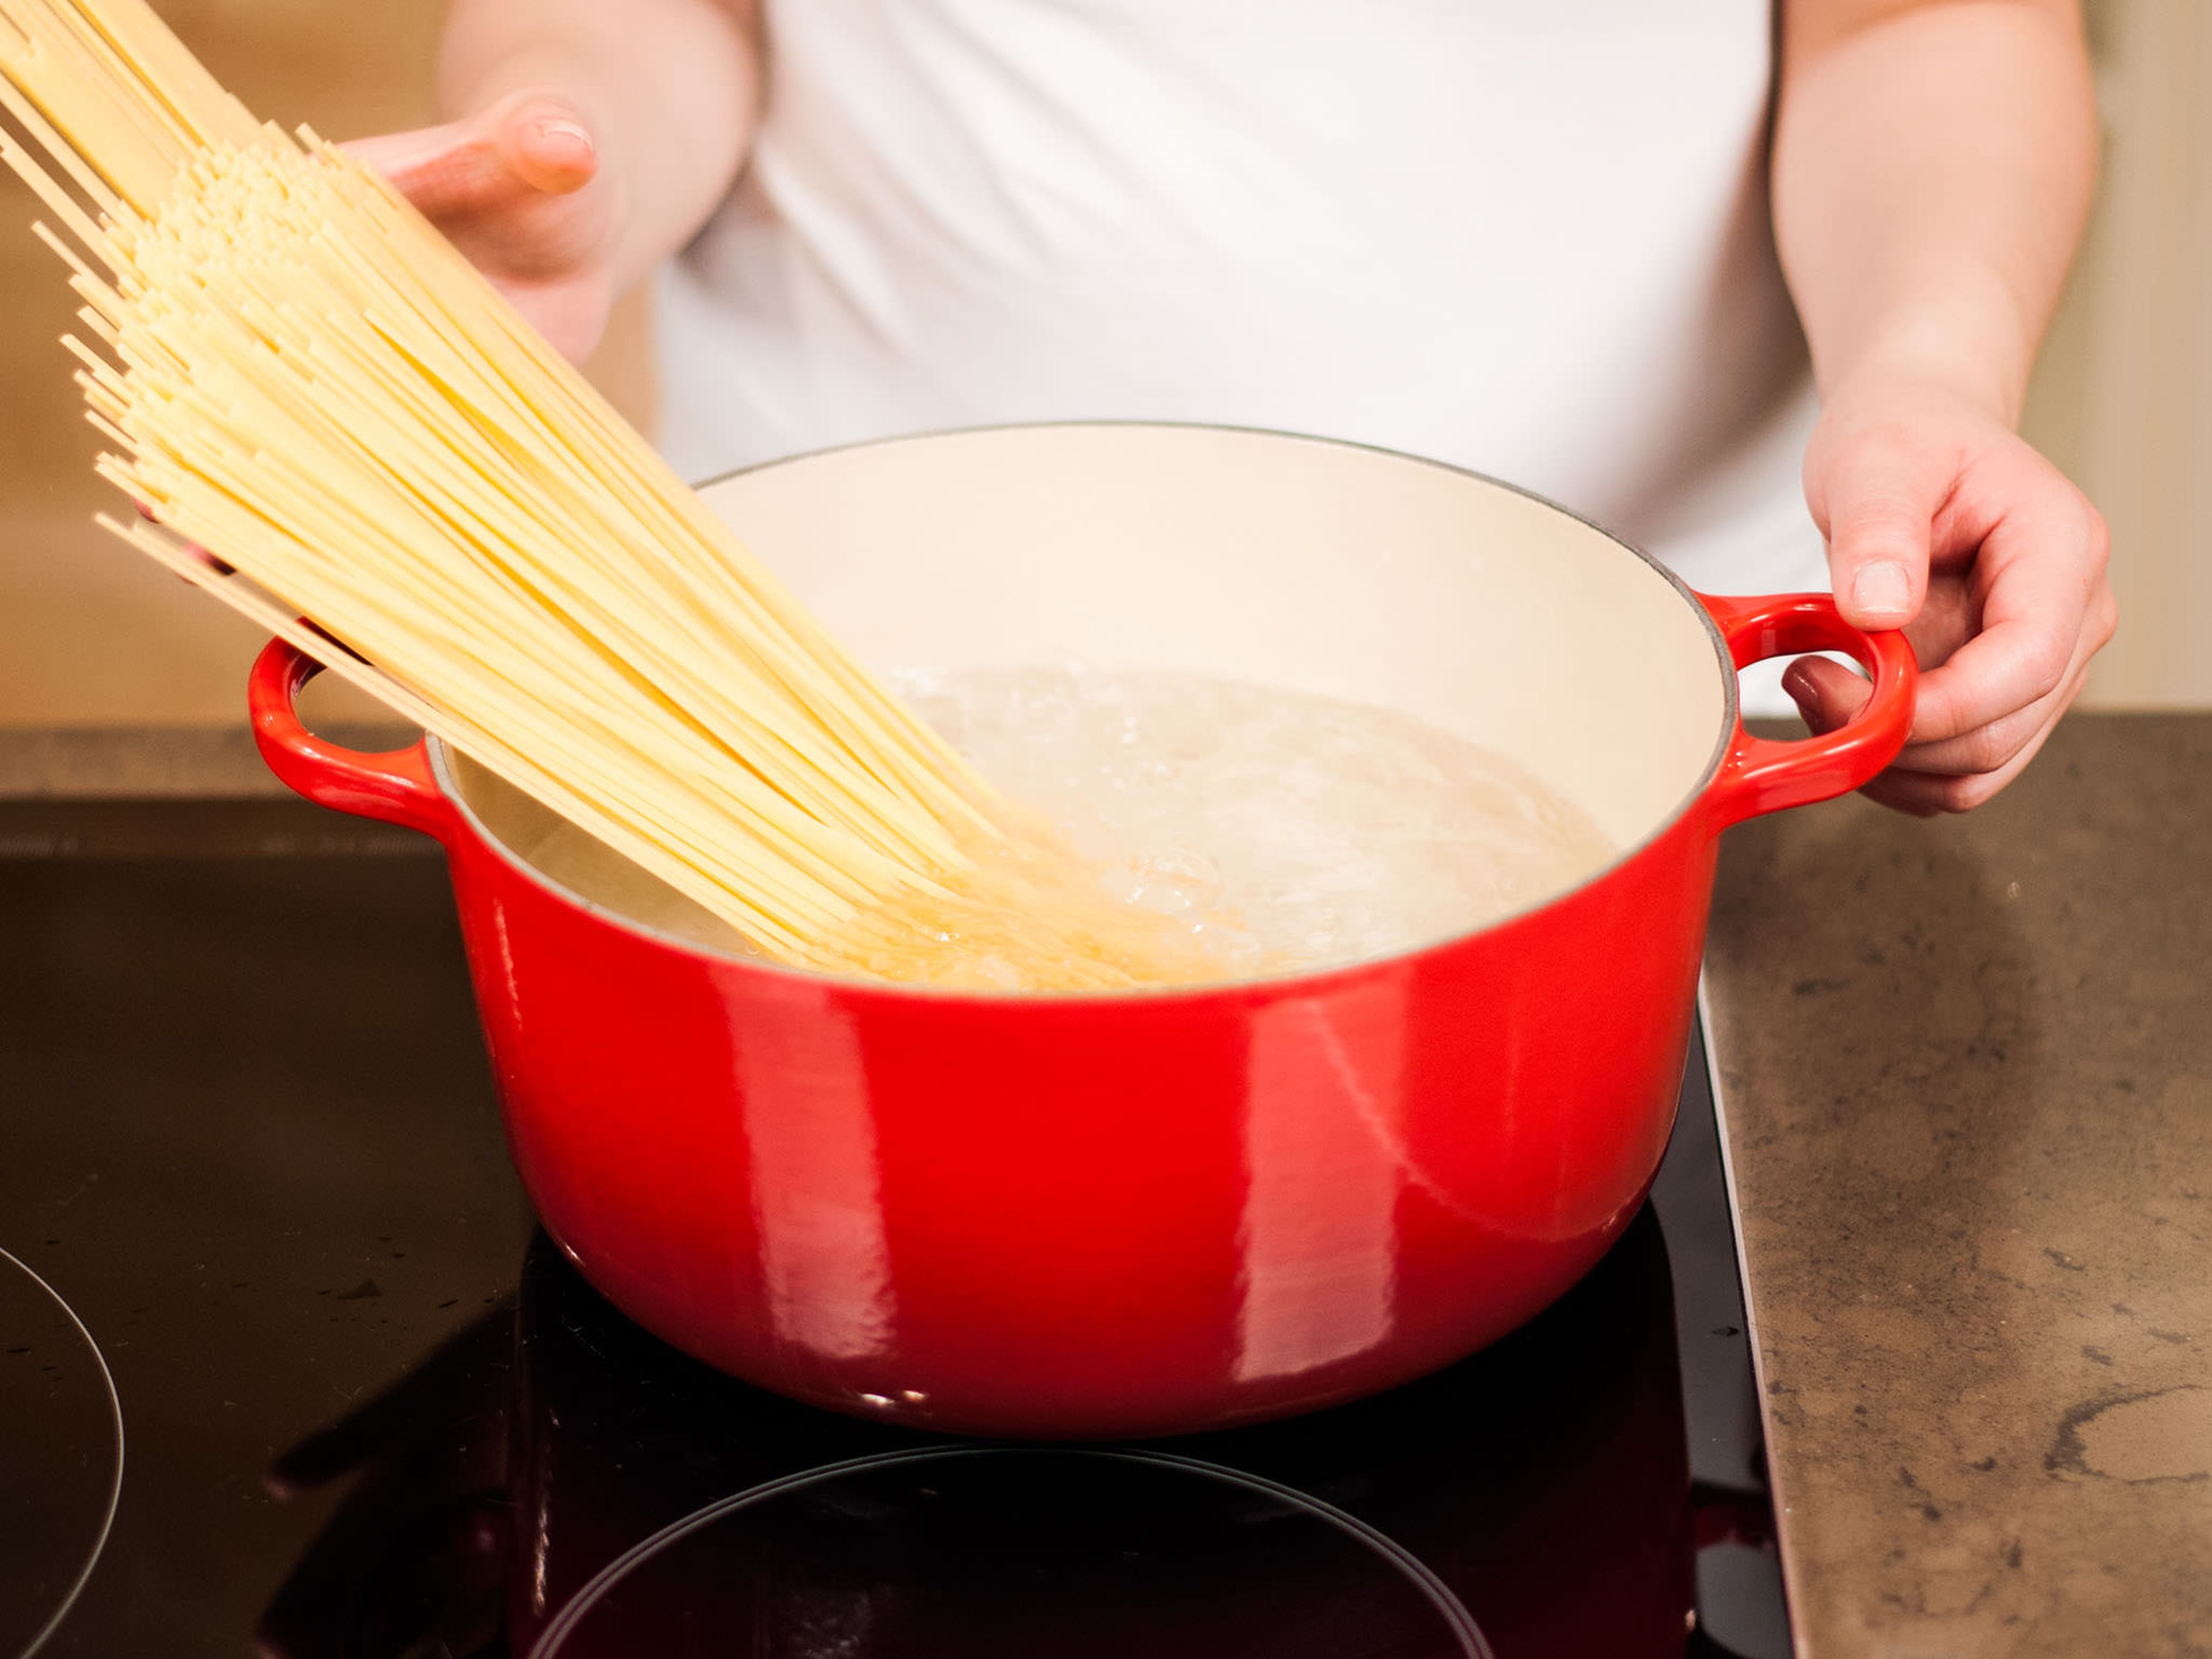 Cook pasta in plenty of salted, boiling water according to package instructions for approx. 10 – 12 min. until al dente. Drain, save some pasta water and set aside.